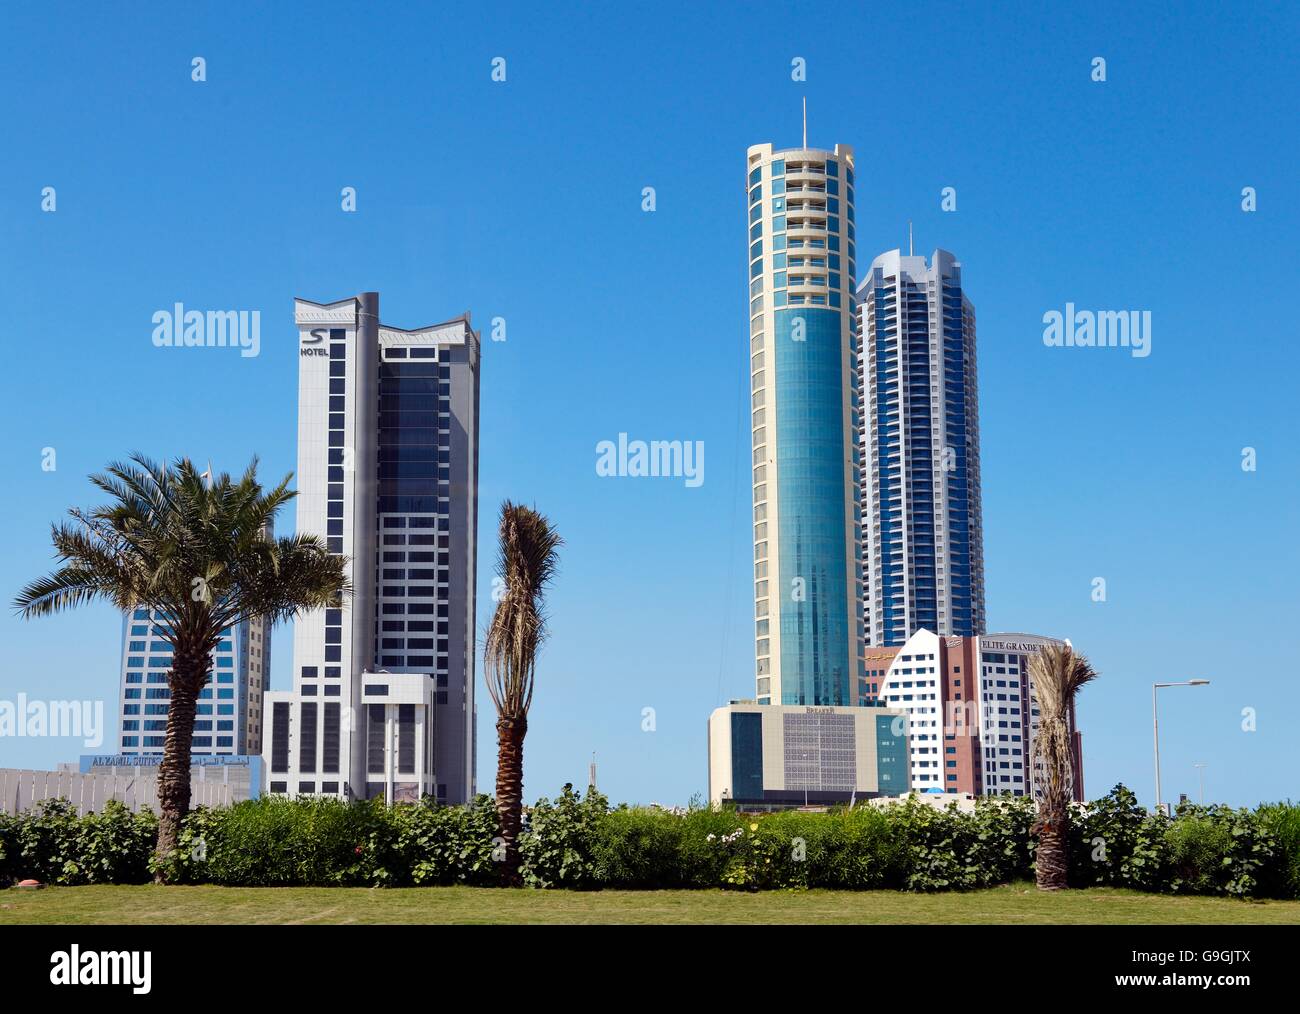 Manama, Bahrain. New hotels and apartments in rapidly developing Seef area. L-R S Hotel, The Breaker, Era Tower and Elite Grande Stock Photo